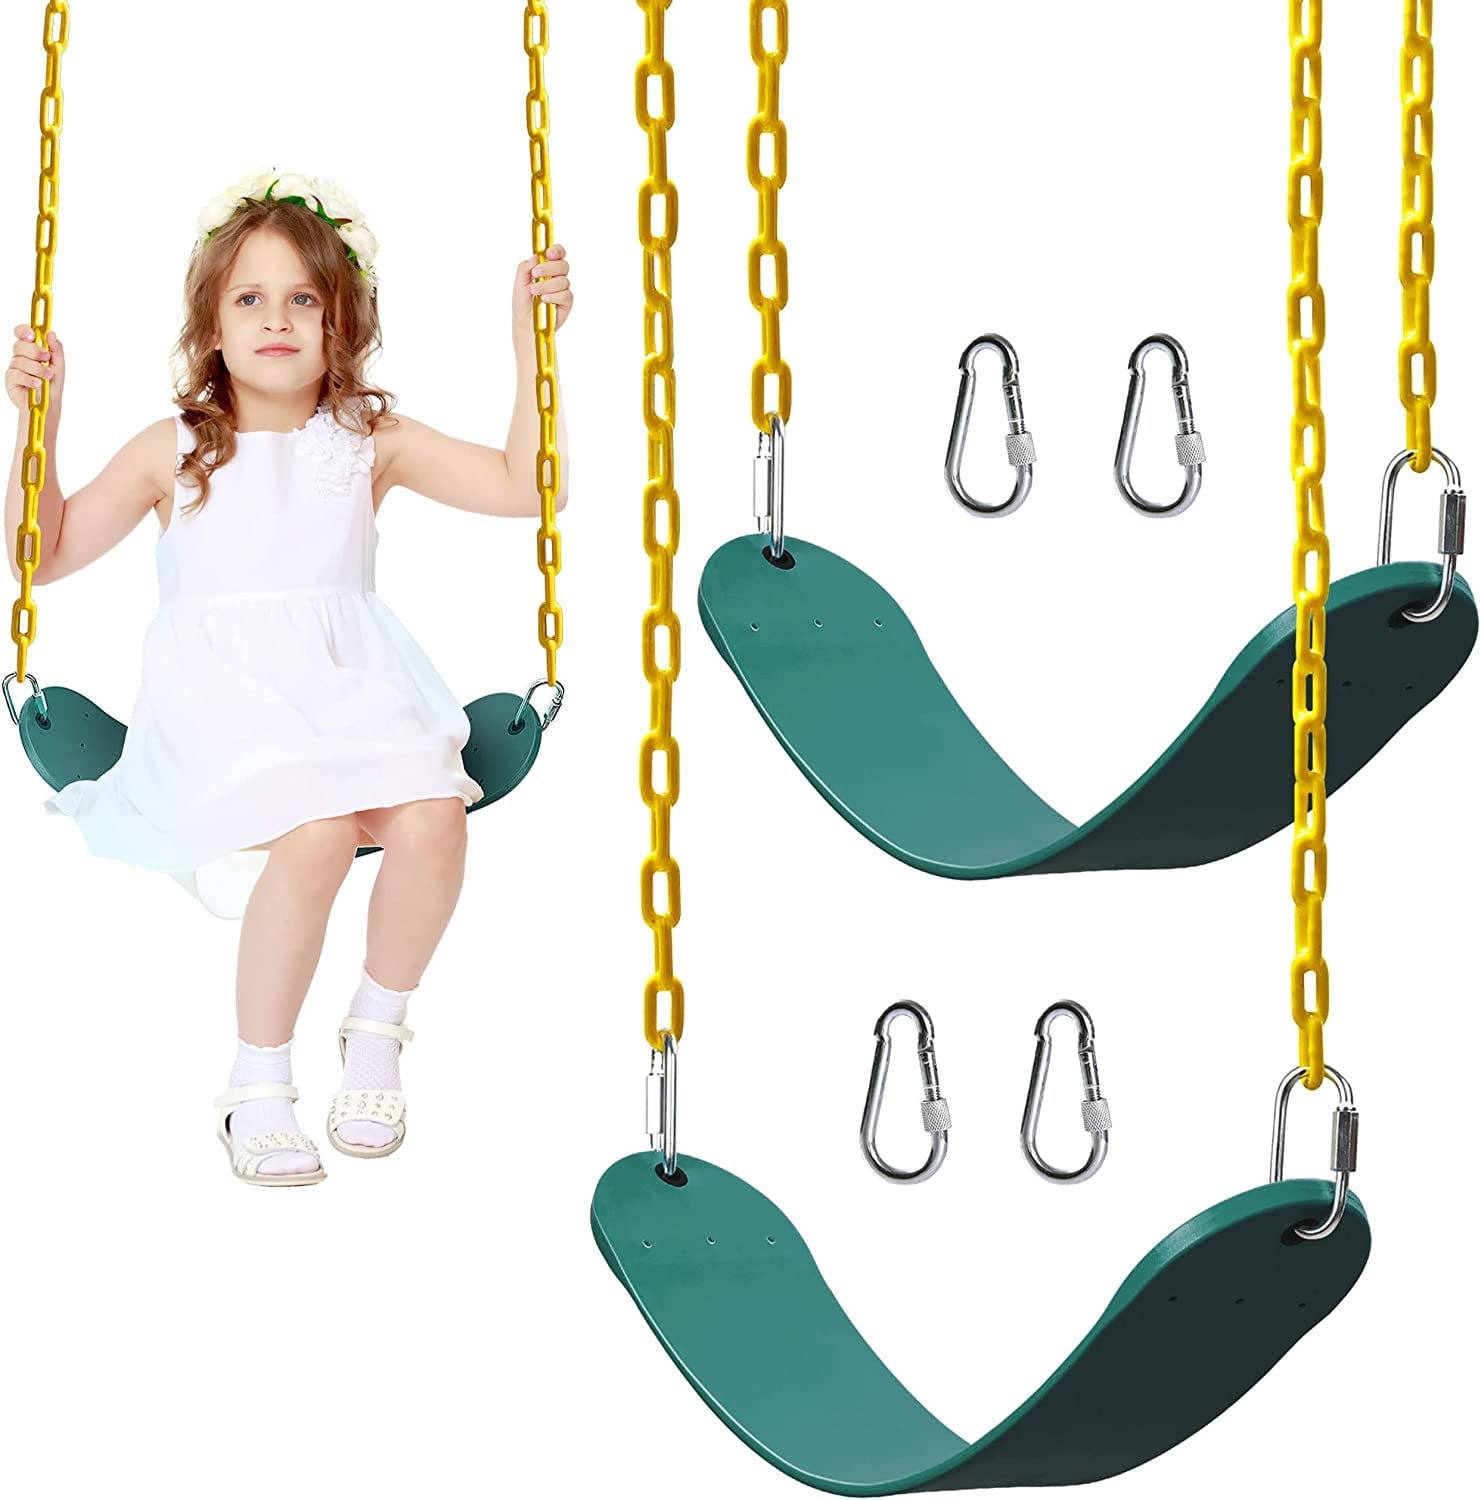 Details about   2X Swing Seat Replacement With Chains Set Kids Heavy Duty Parts Outdoor Playset 